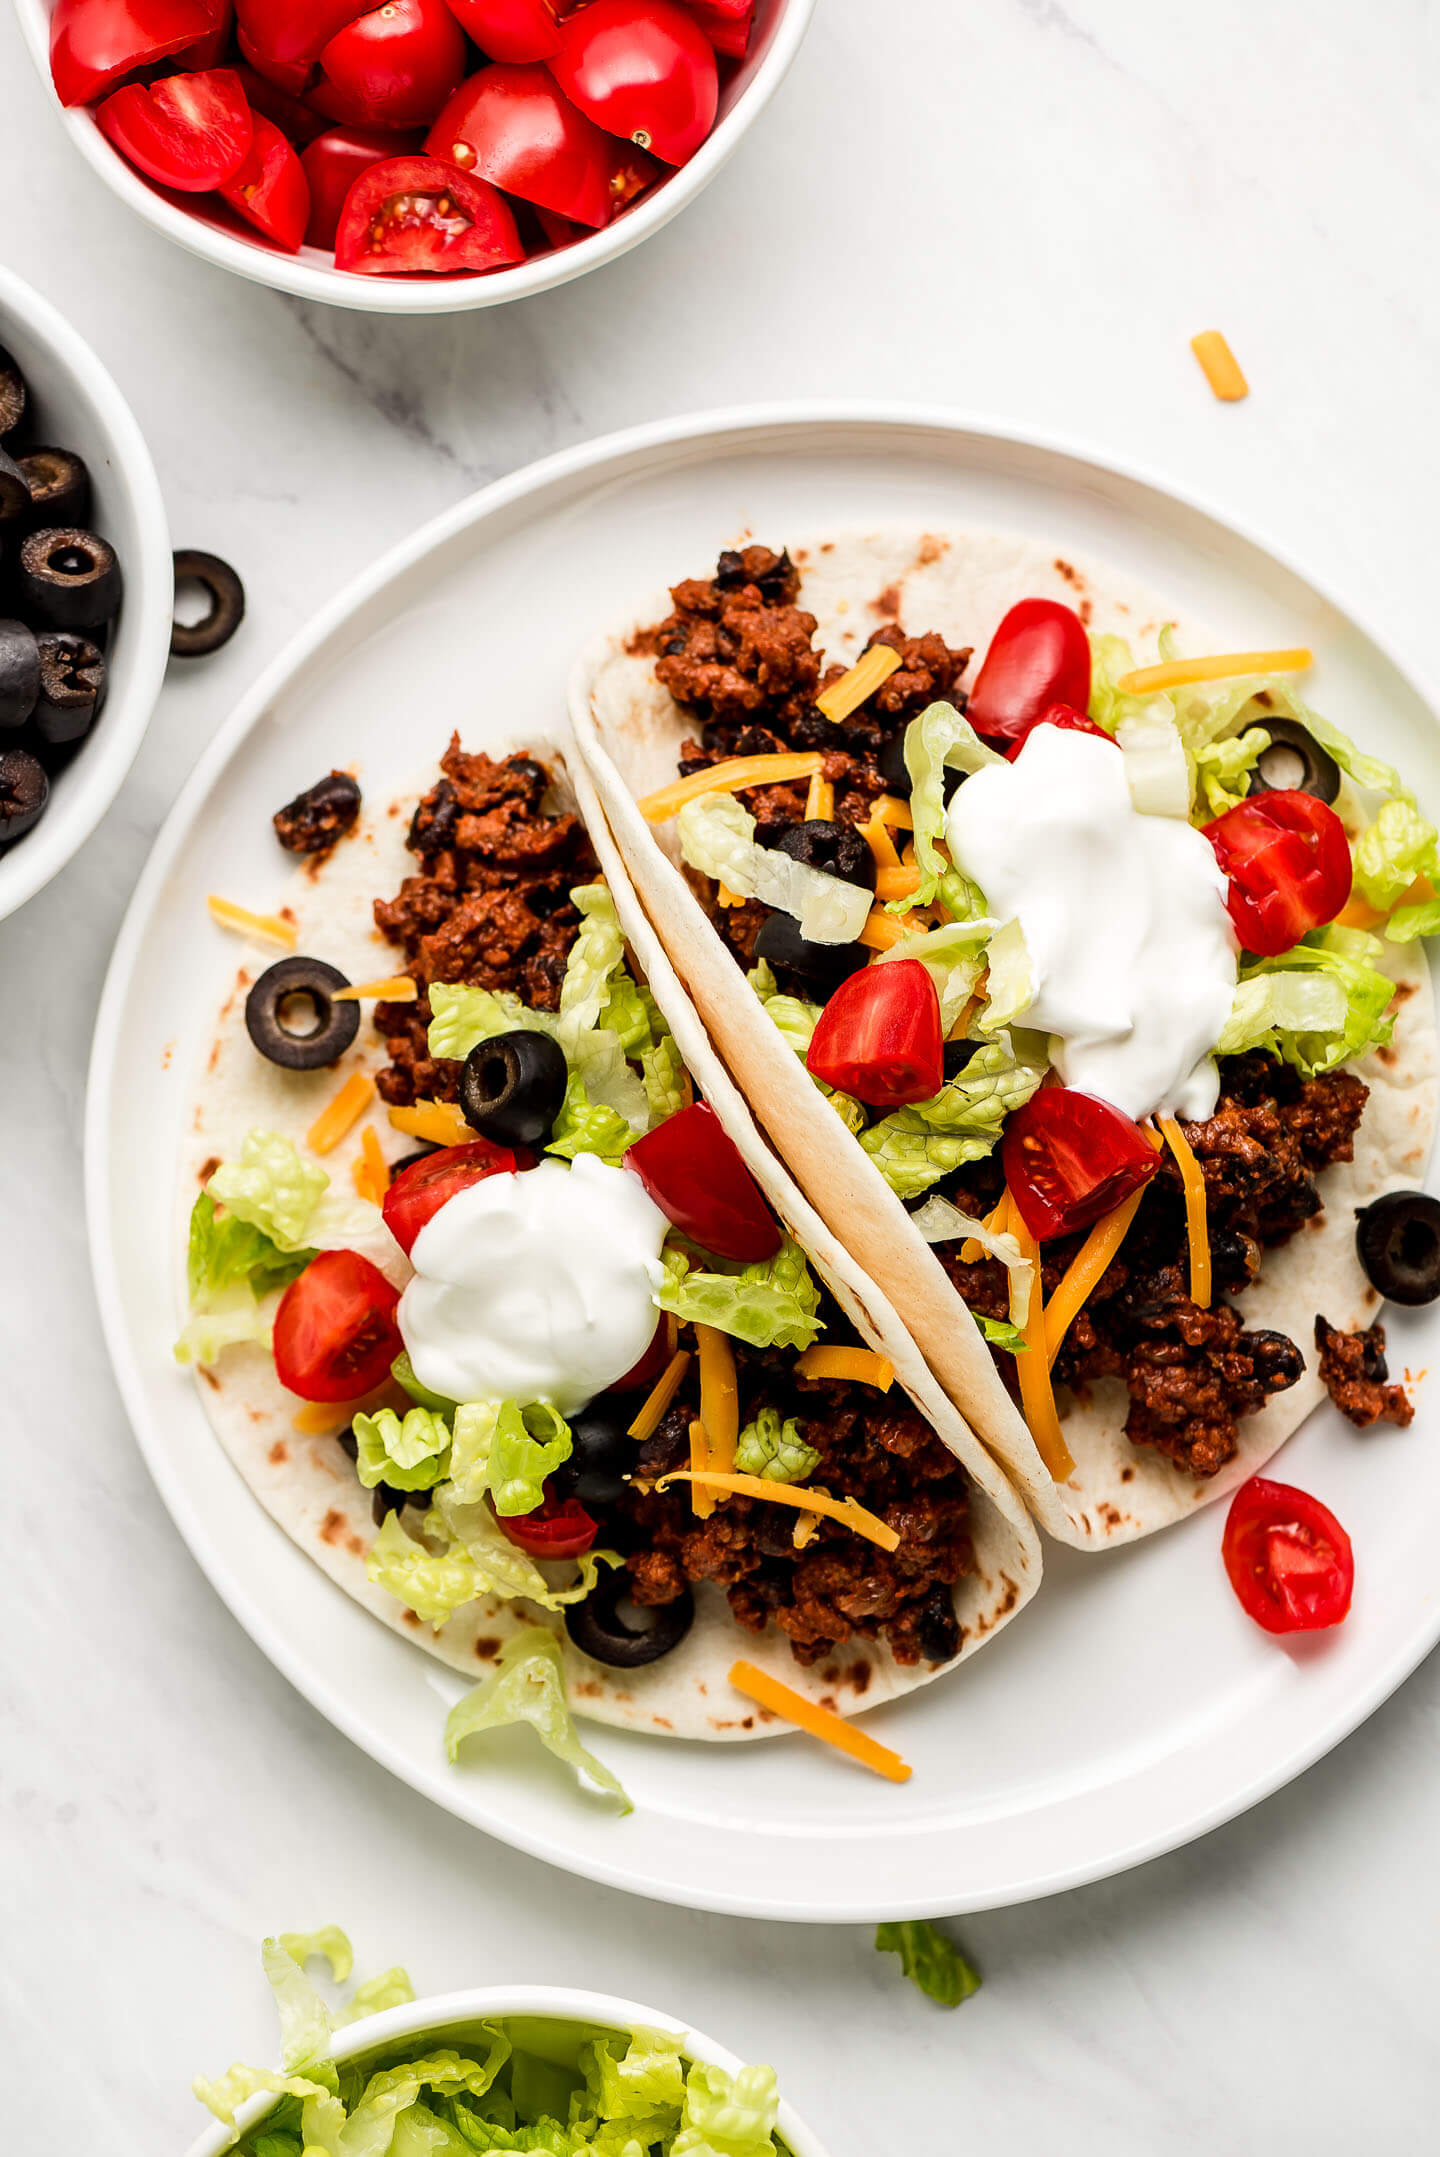 Two tortillas filled with ground beef filling and topped with lettuce, tomatoes, black olives, cheese, and sour cream.